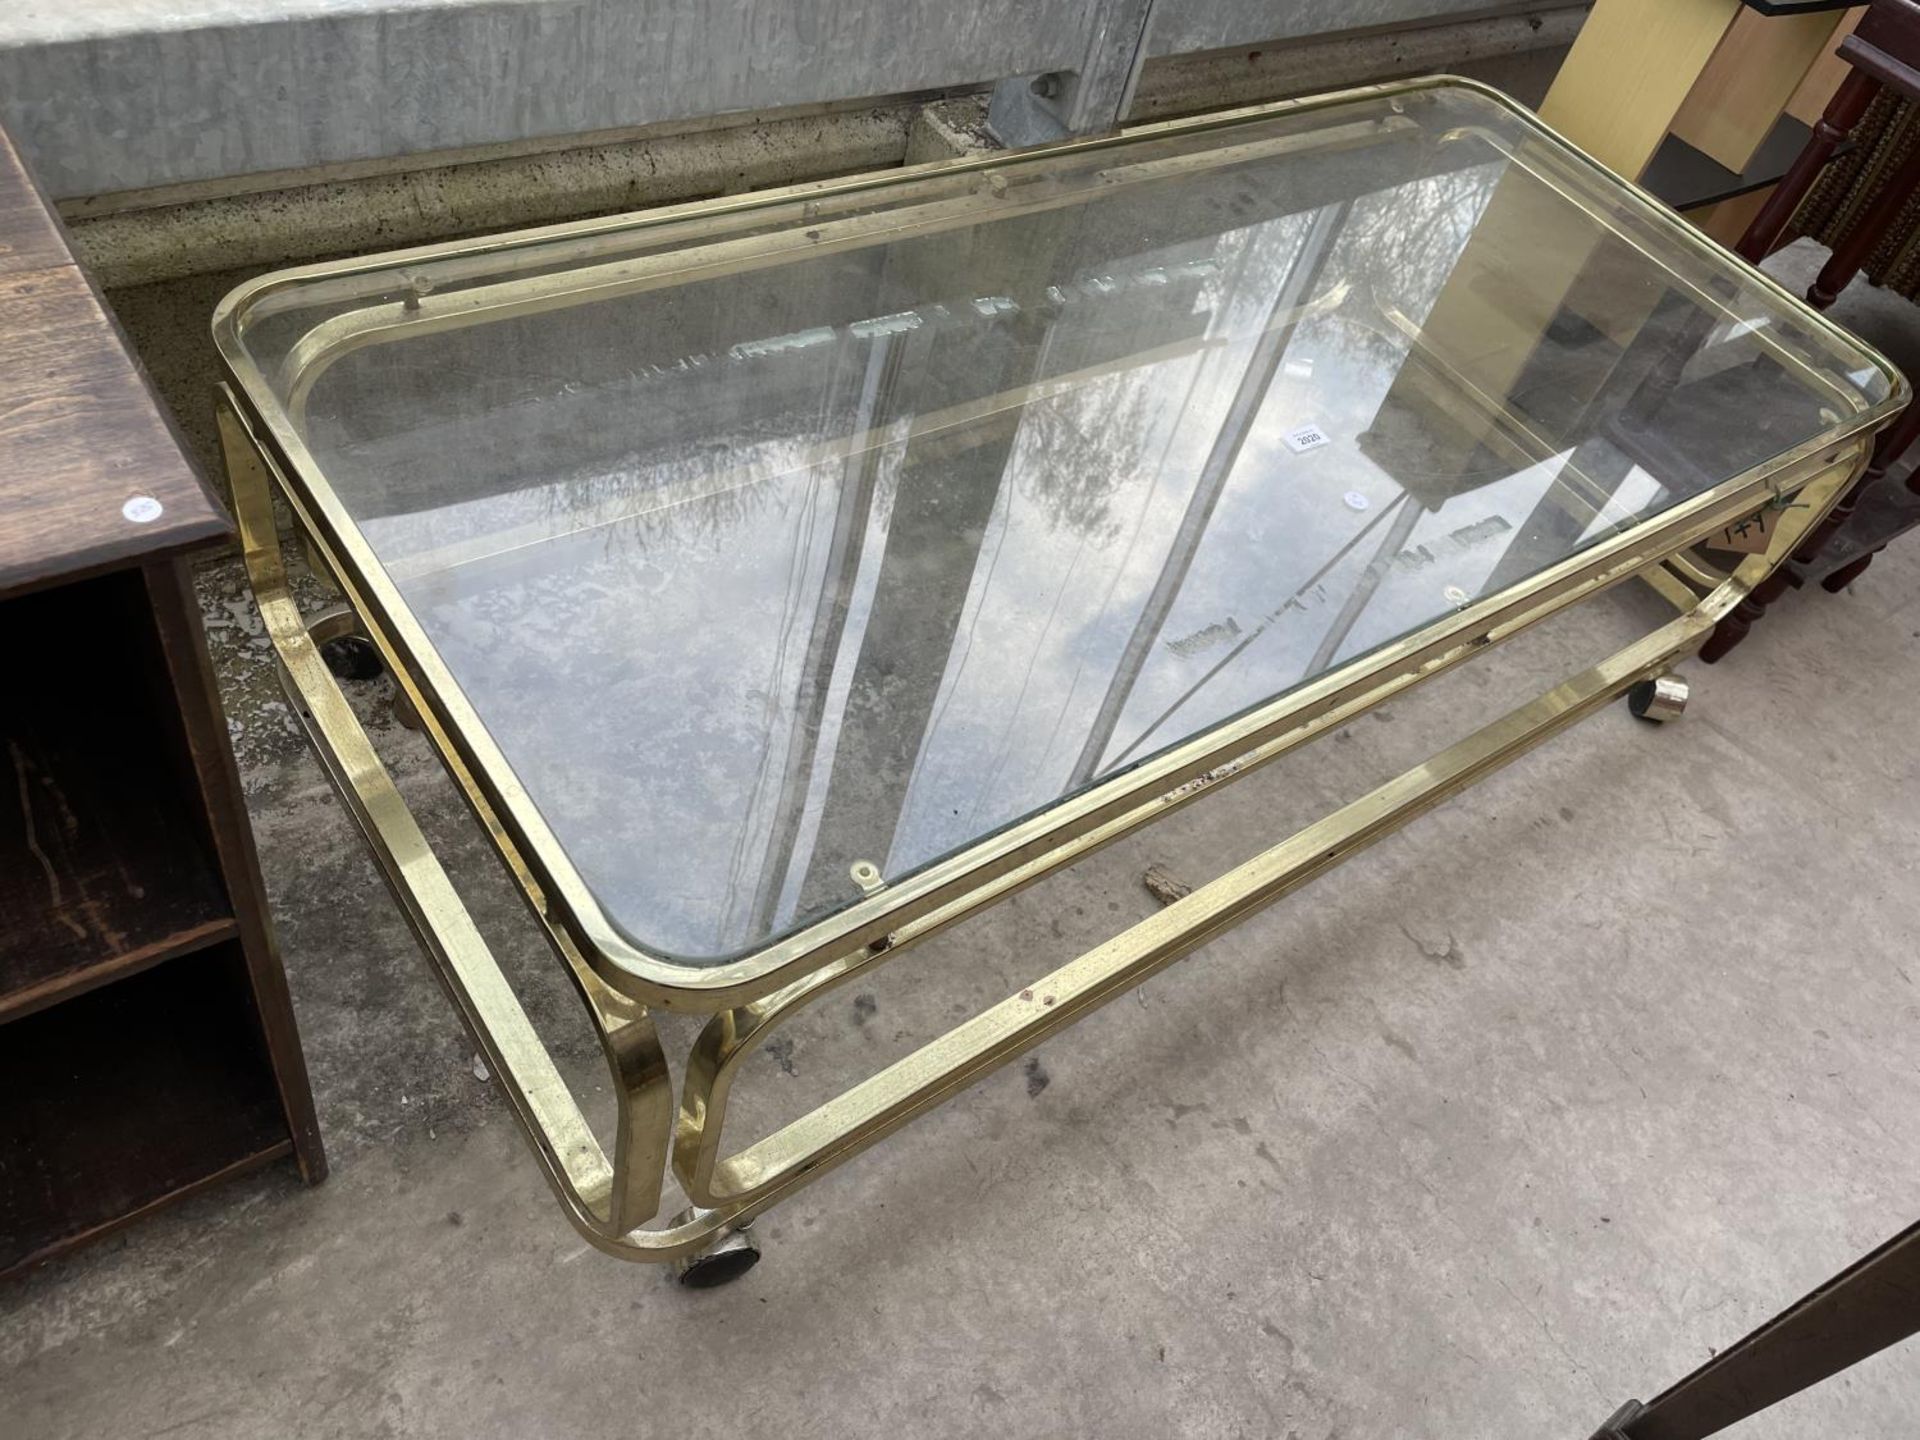 A MODERN BRASS FRAMED COFFEE TABLE WITH GLASS TOP, 54X24"